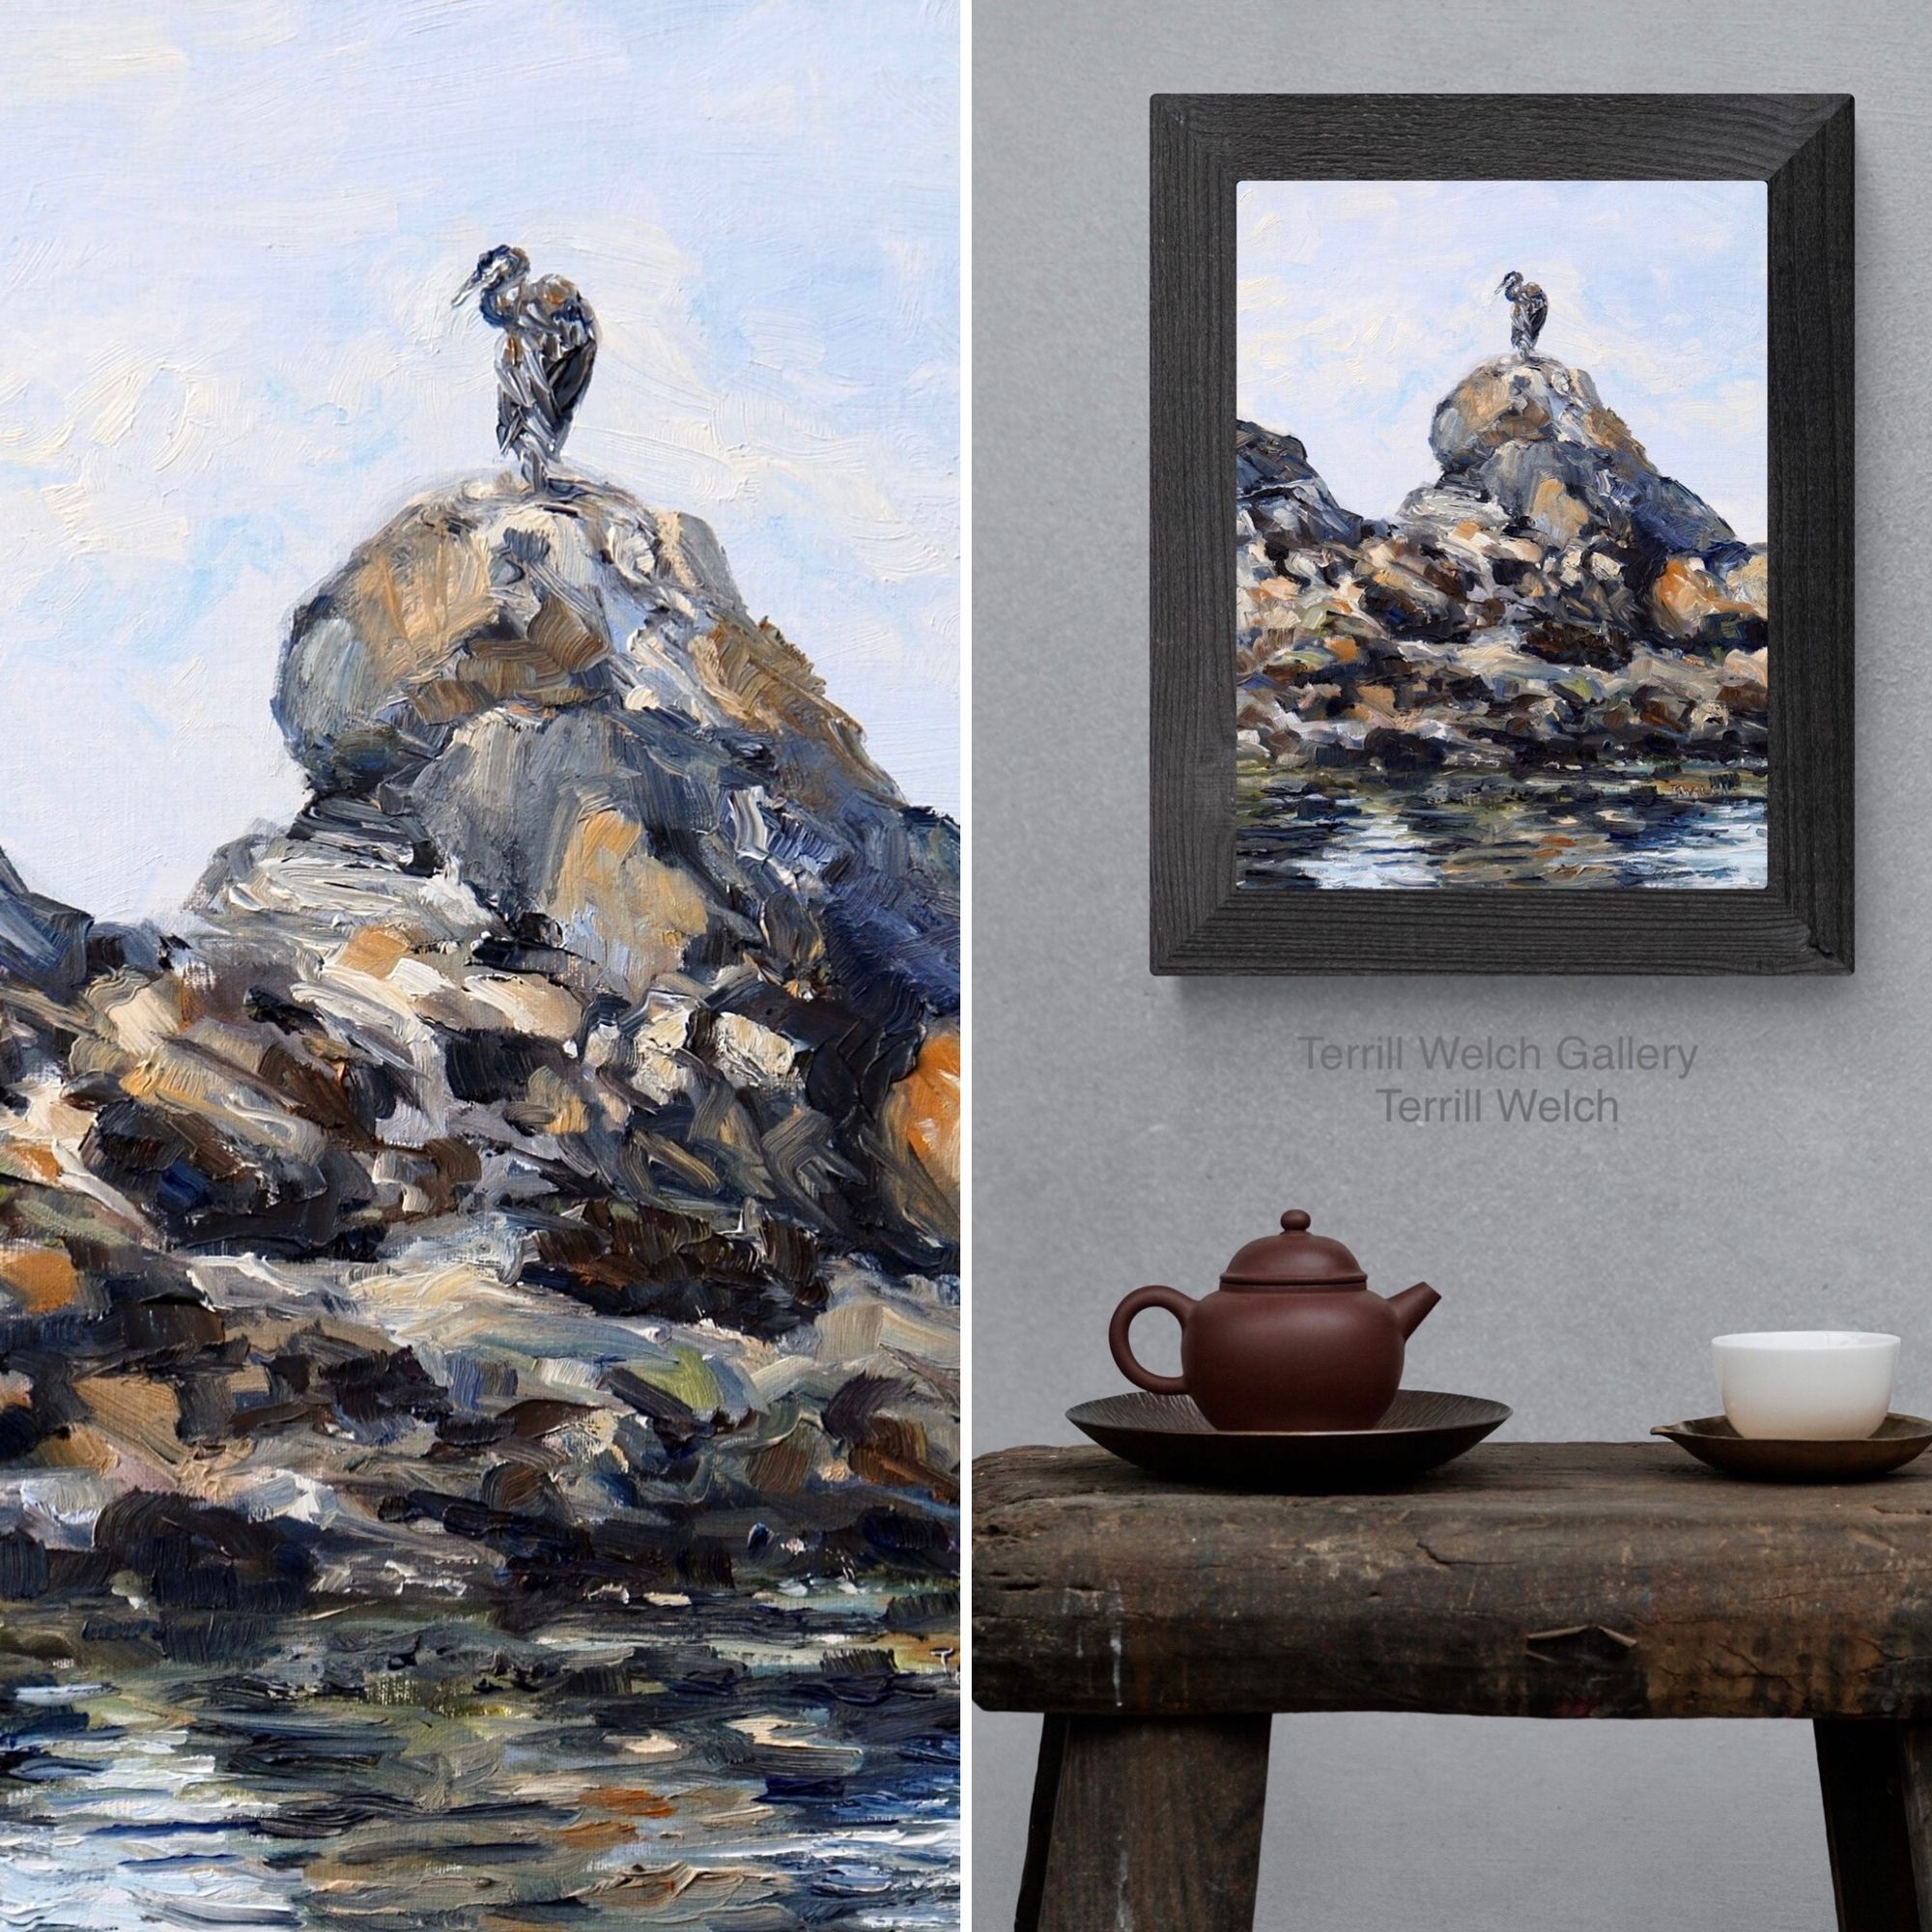 SEVEN TIPS FOR COLLECTING ORIGINAL ART ON A BUDGET